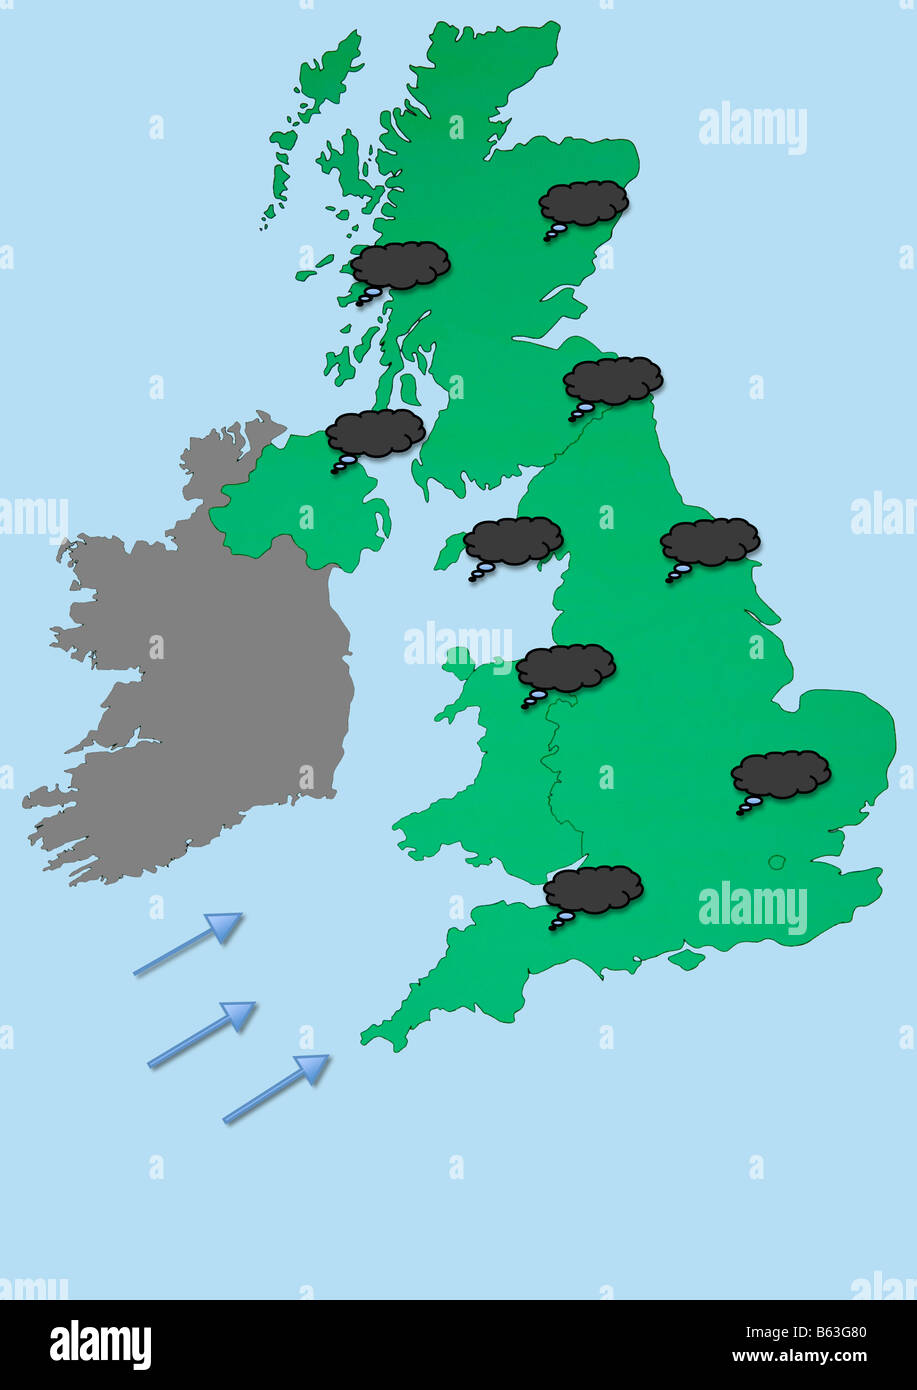 UK Weather forecast map showing rain clouds and south westerly wind. Britain Stock Photo